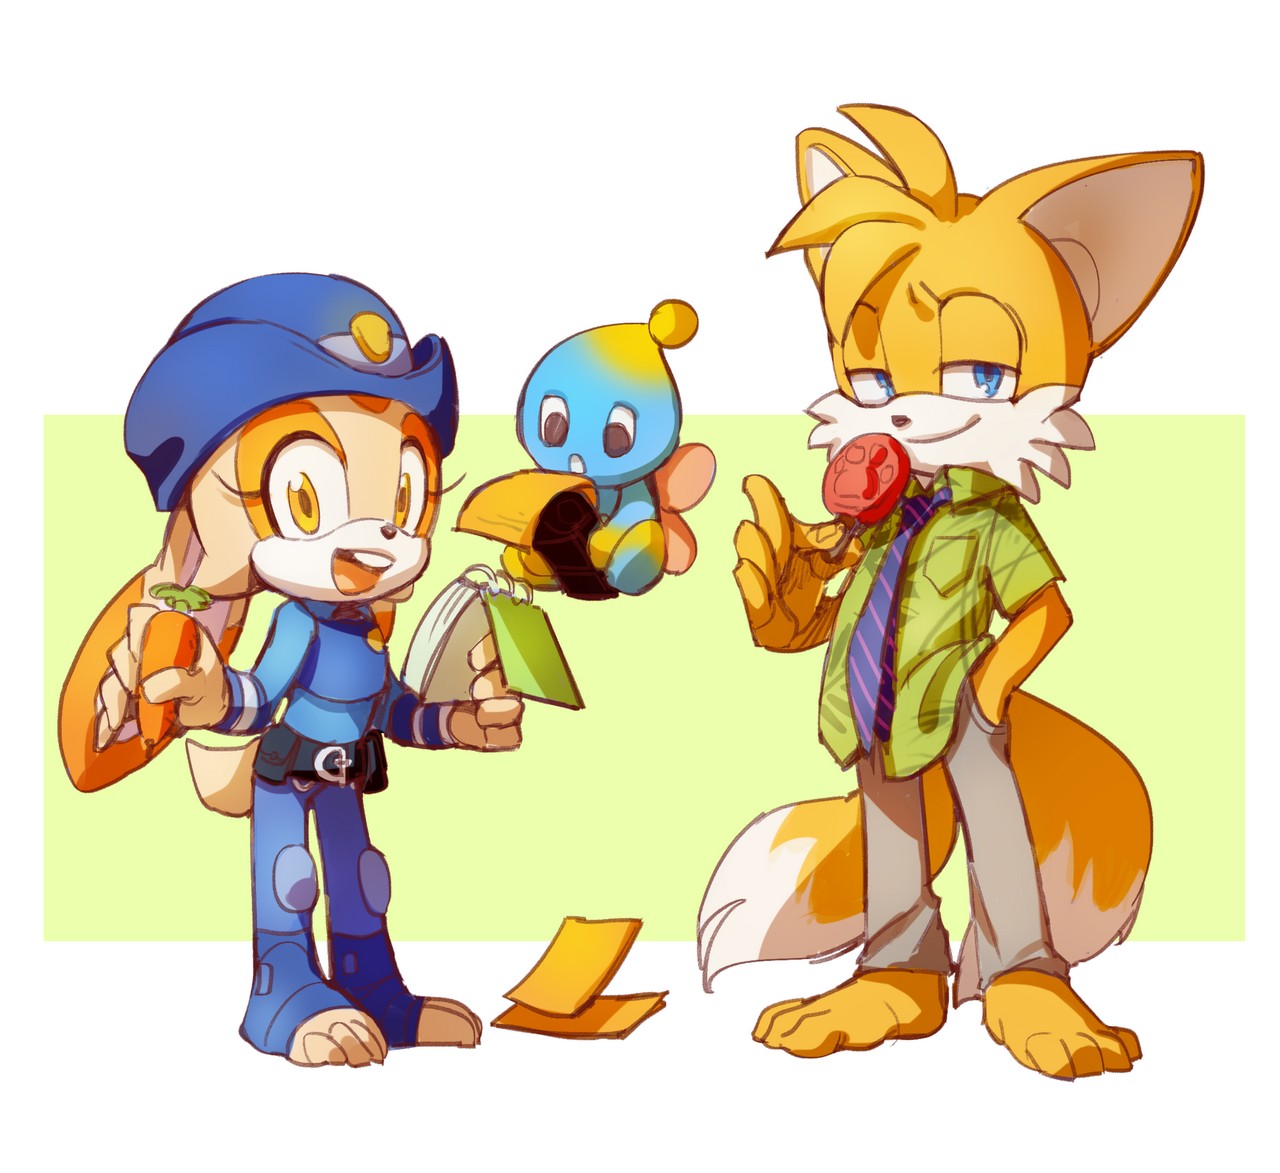 Cheese The Chao Cream The Rabbit Judy Hopps Miles Prower Nick Wilde By Lenmue